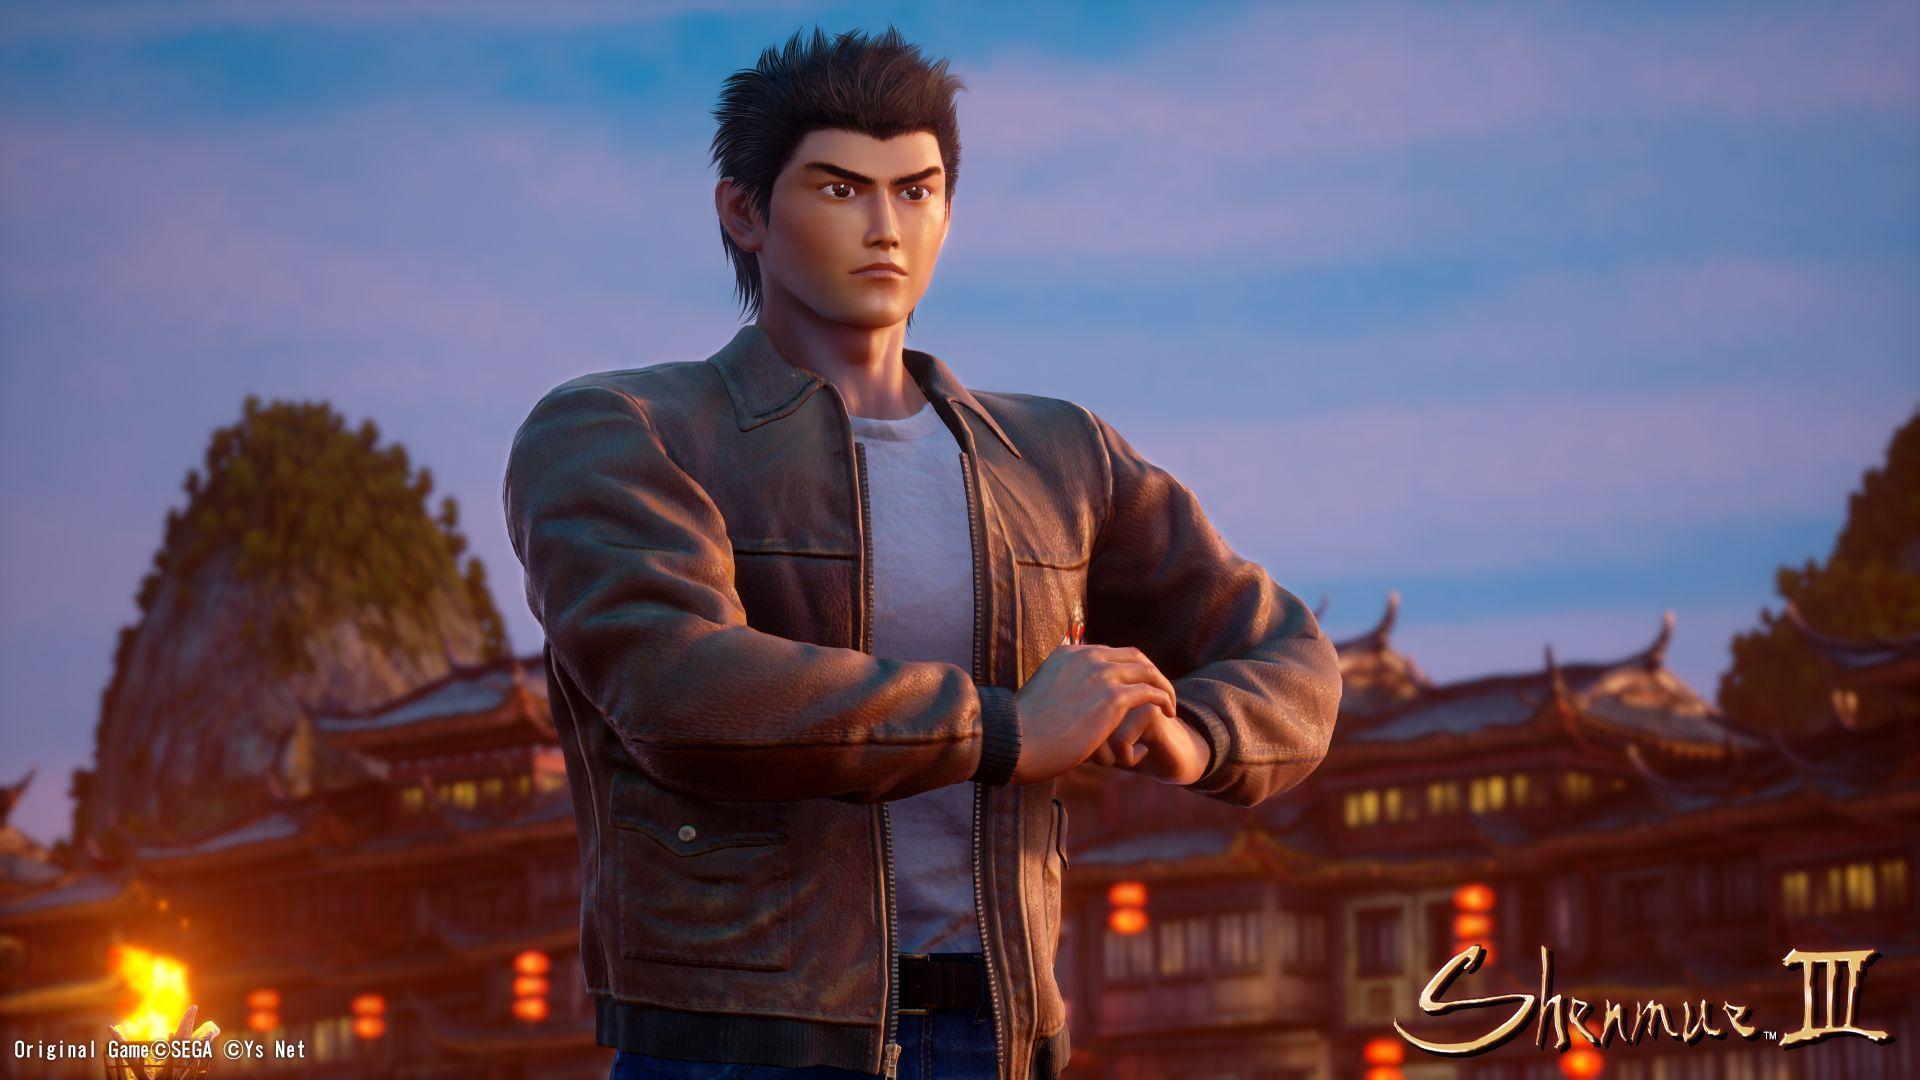 shenmue 3 backer codes